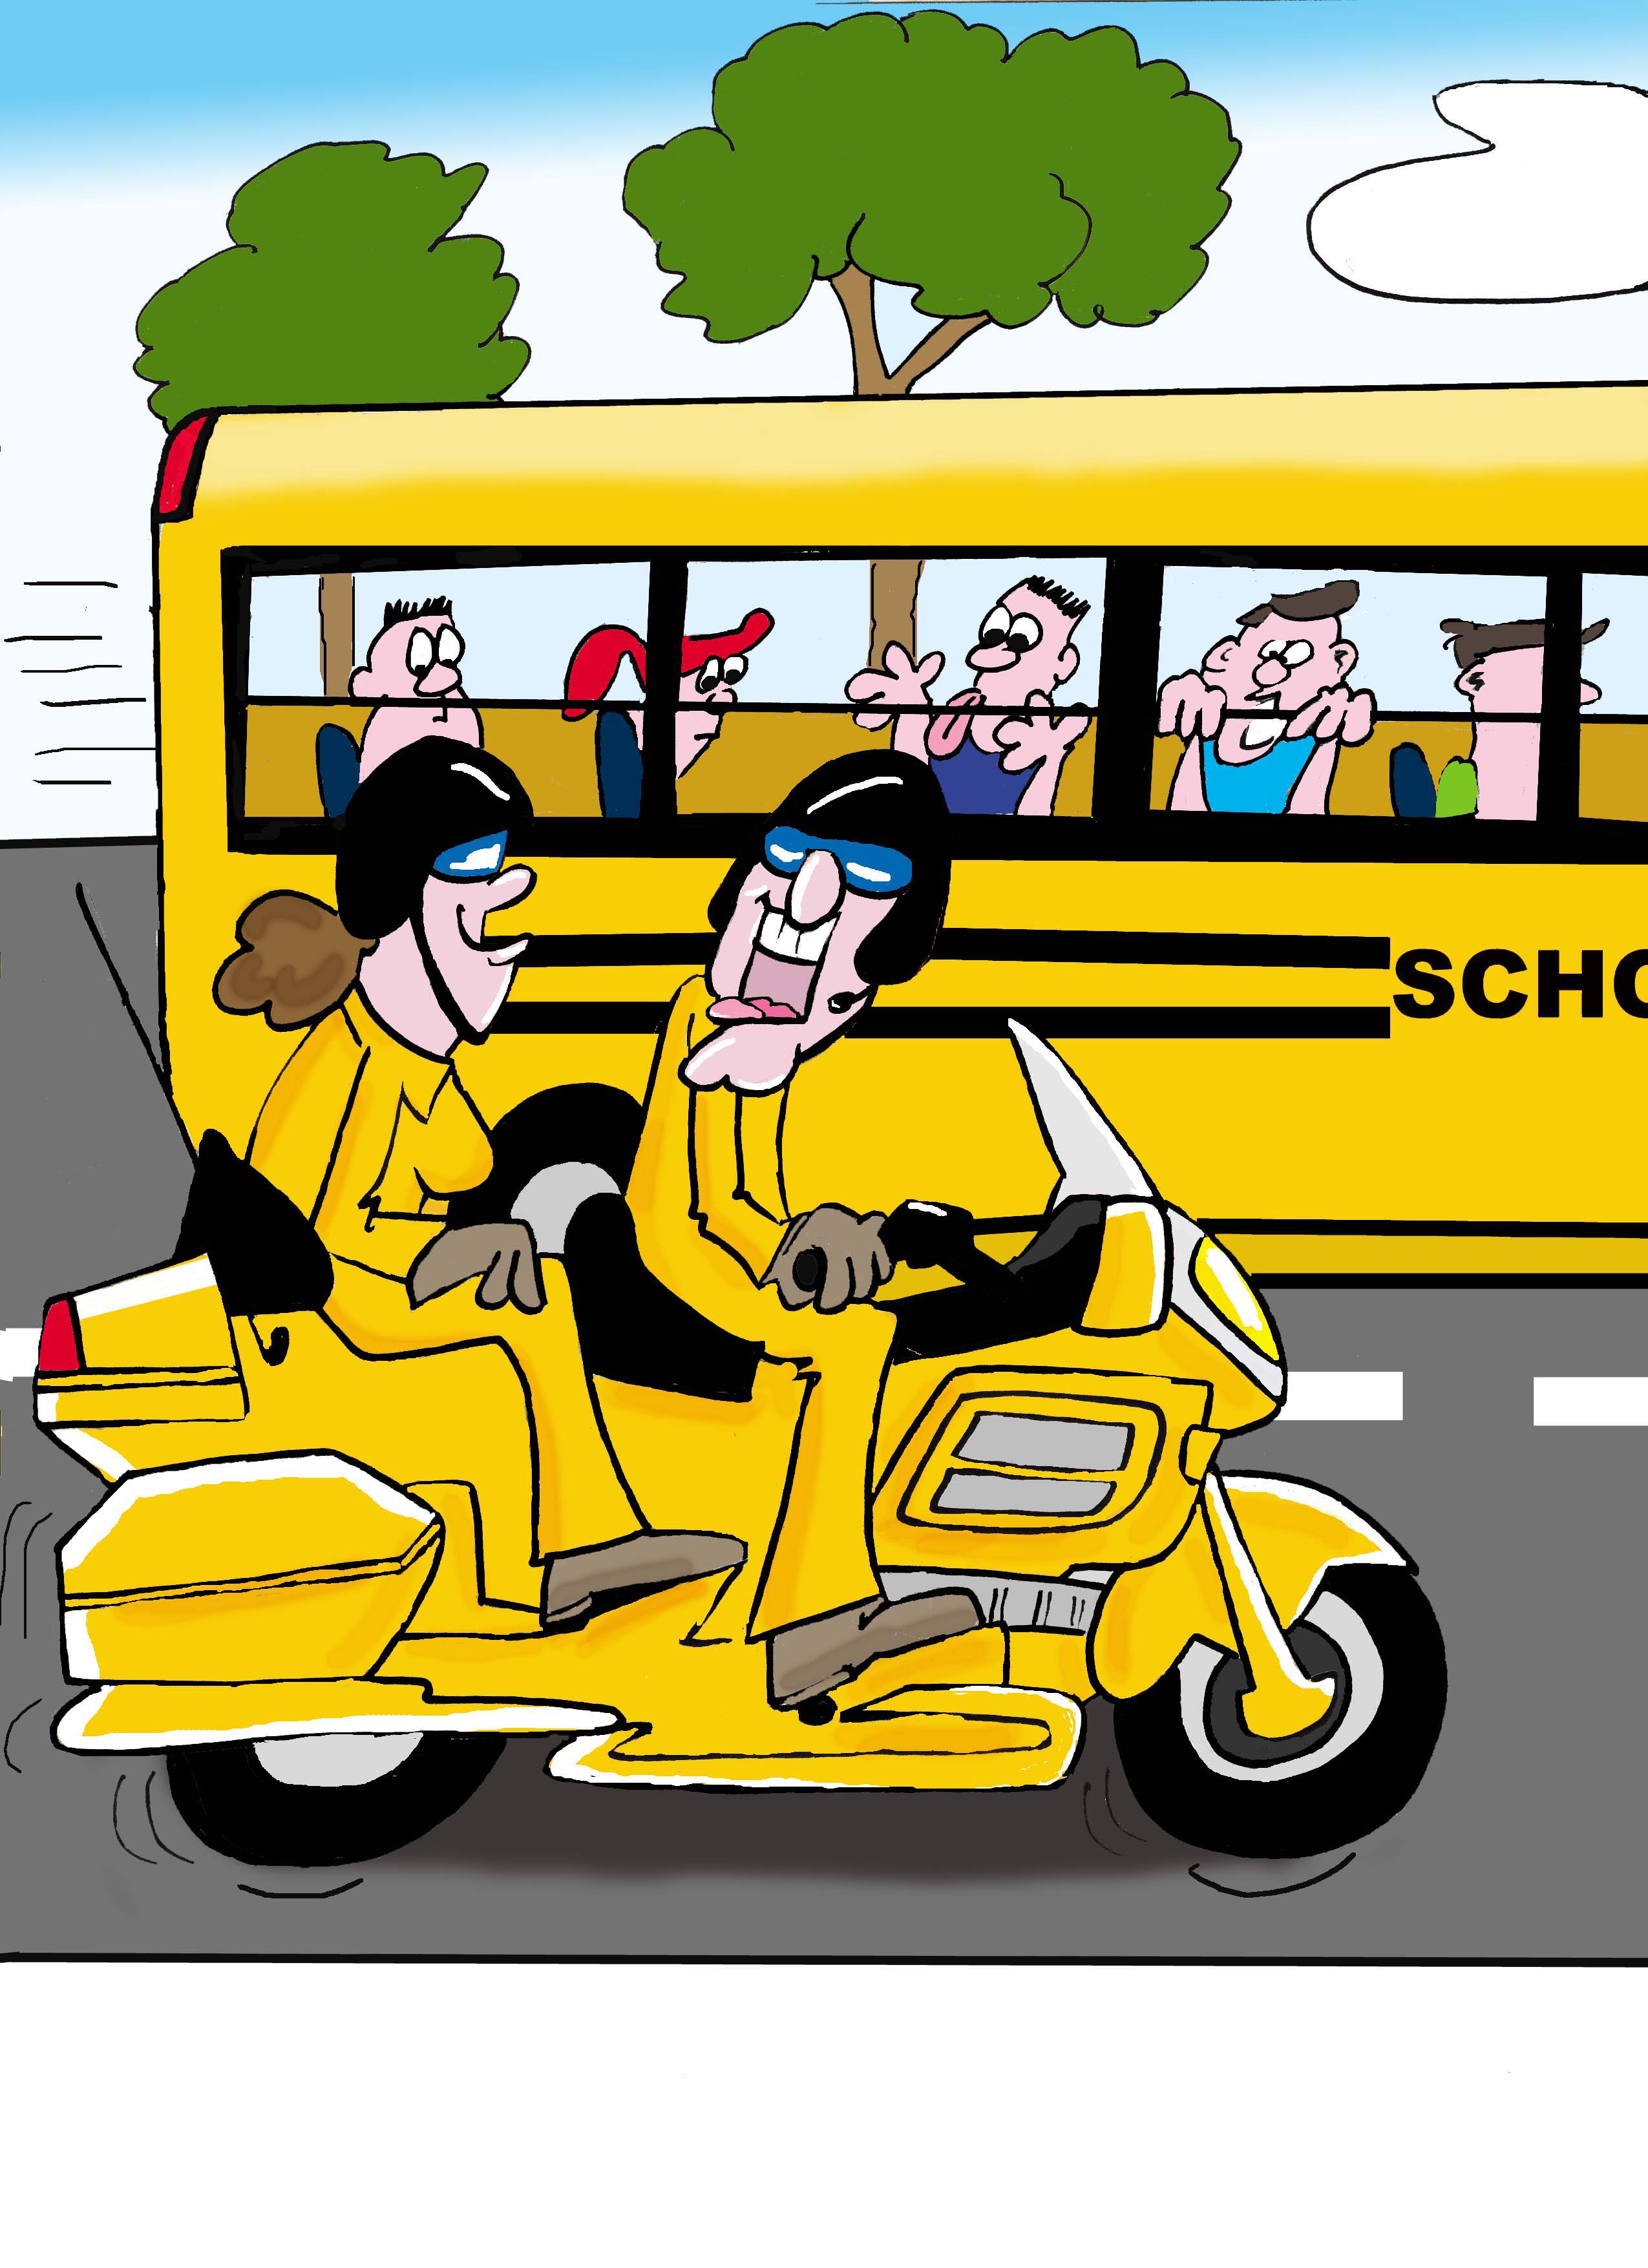 Funny cartoon school bus pictures search results